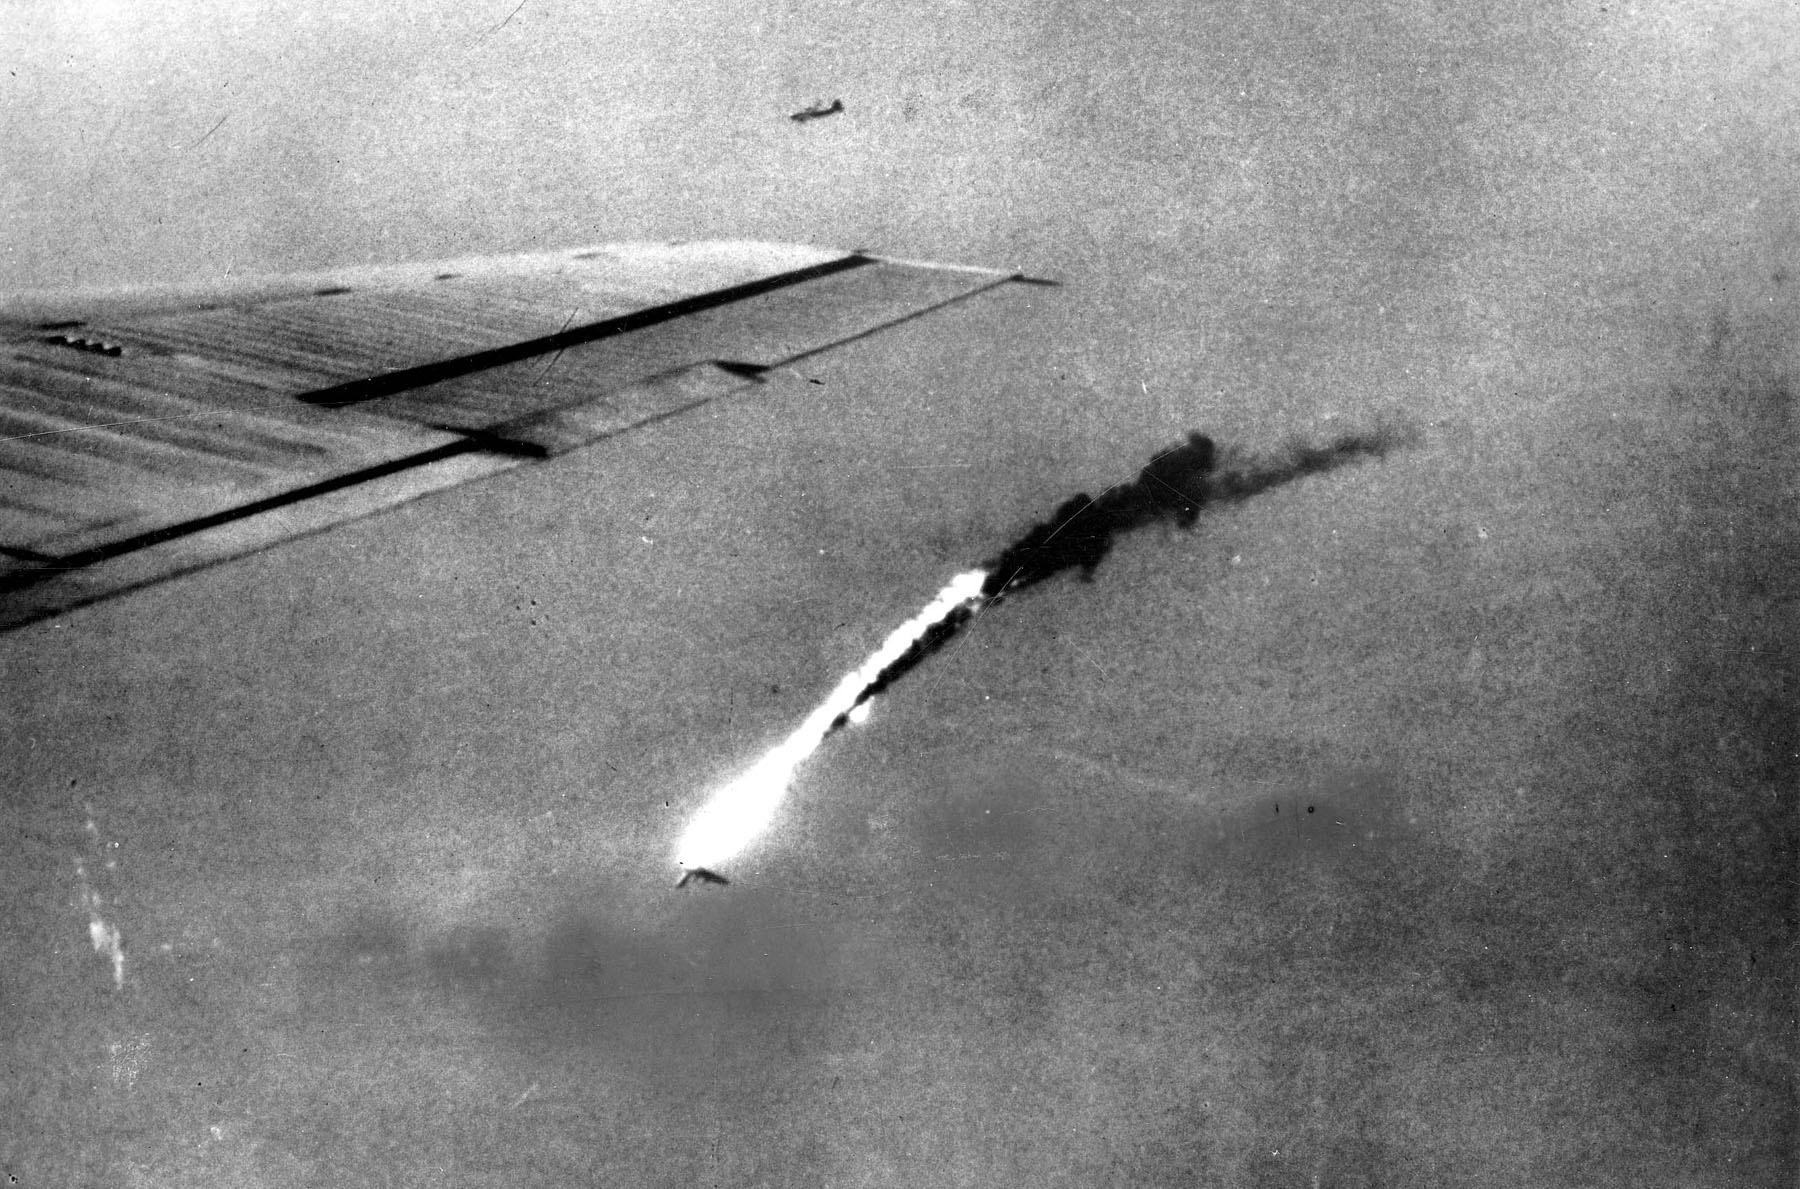 Despite beliefs to the contrary, B-29s, like this one with its wing shot away, were not immune from ground fire. 